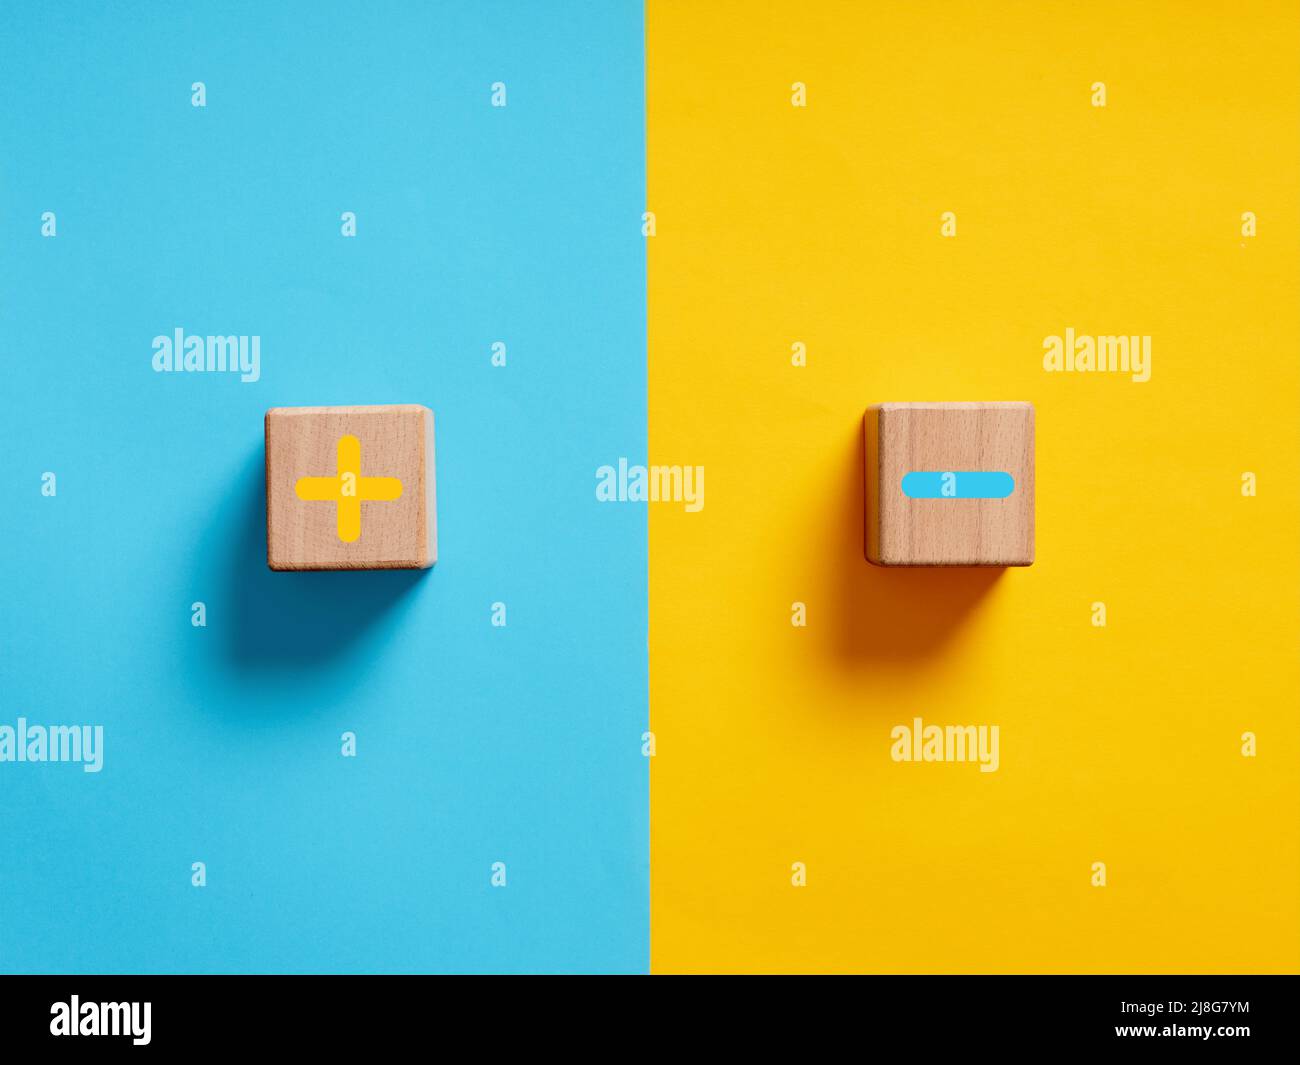 Pros and cons or strengths and weaknesses concept. Plus and minus symbols on blue and yellow background. Stock Photo